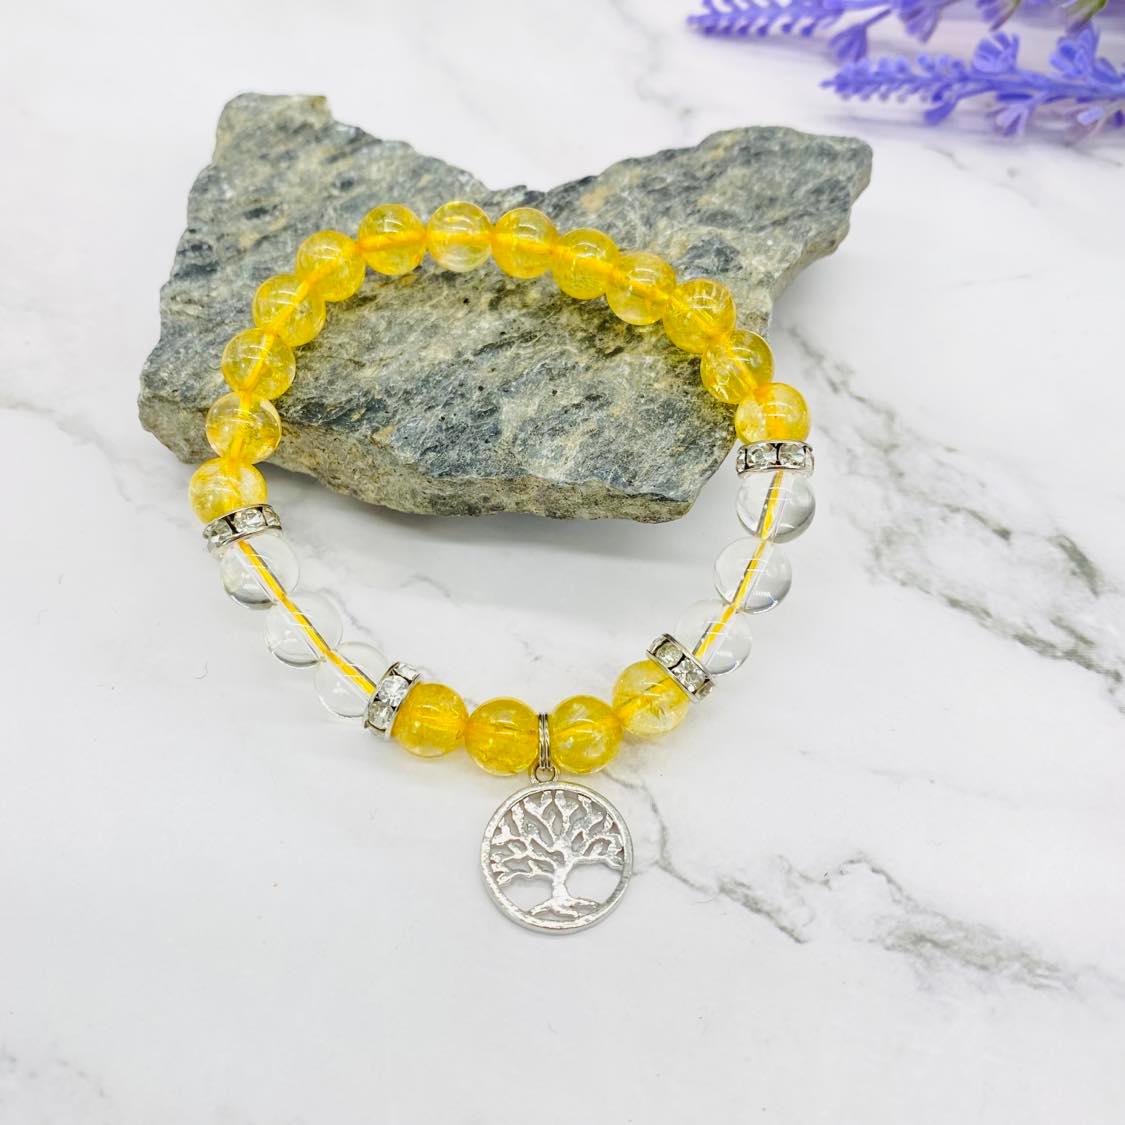 8 mm Citrine Bracelet with Charms, Quartz with Citrine, Tree of Life Bracelet, Citrine with Buddha Jewelry,  Stretch Bracelet, Gift for Her